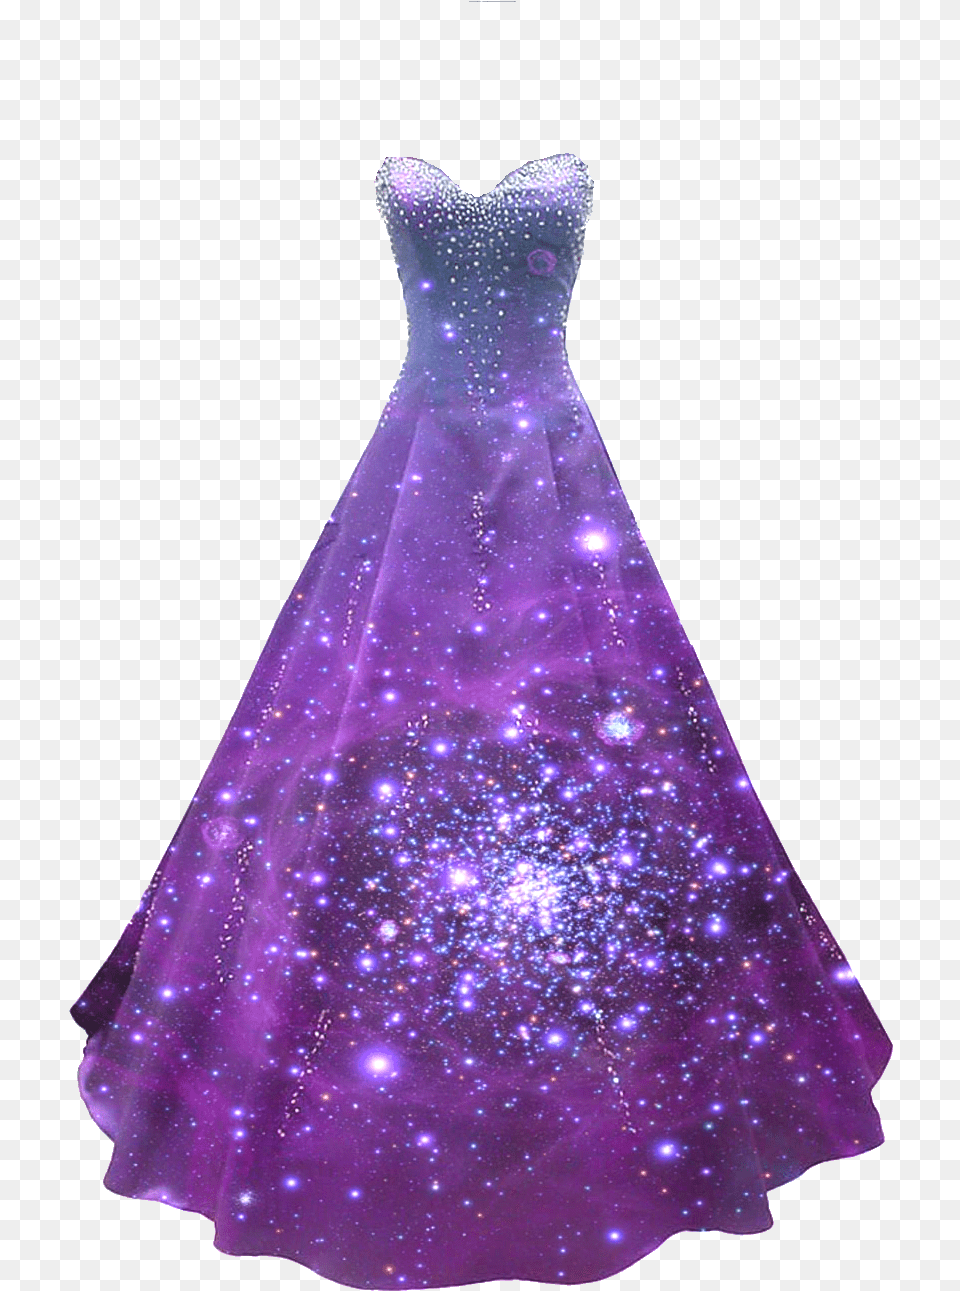 Galaxy Dress Dress Dress Skirt Galaxy Outfit Purple Dress Transparent Background, Clothing, Fashion, Formal Wear, Gown Png